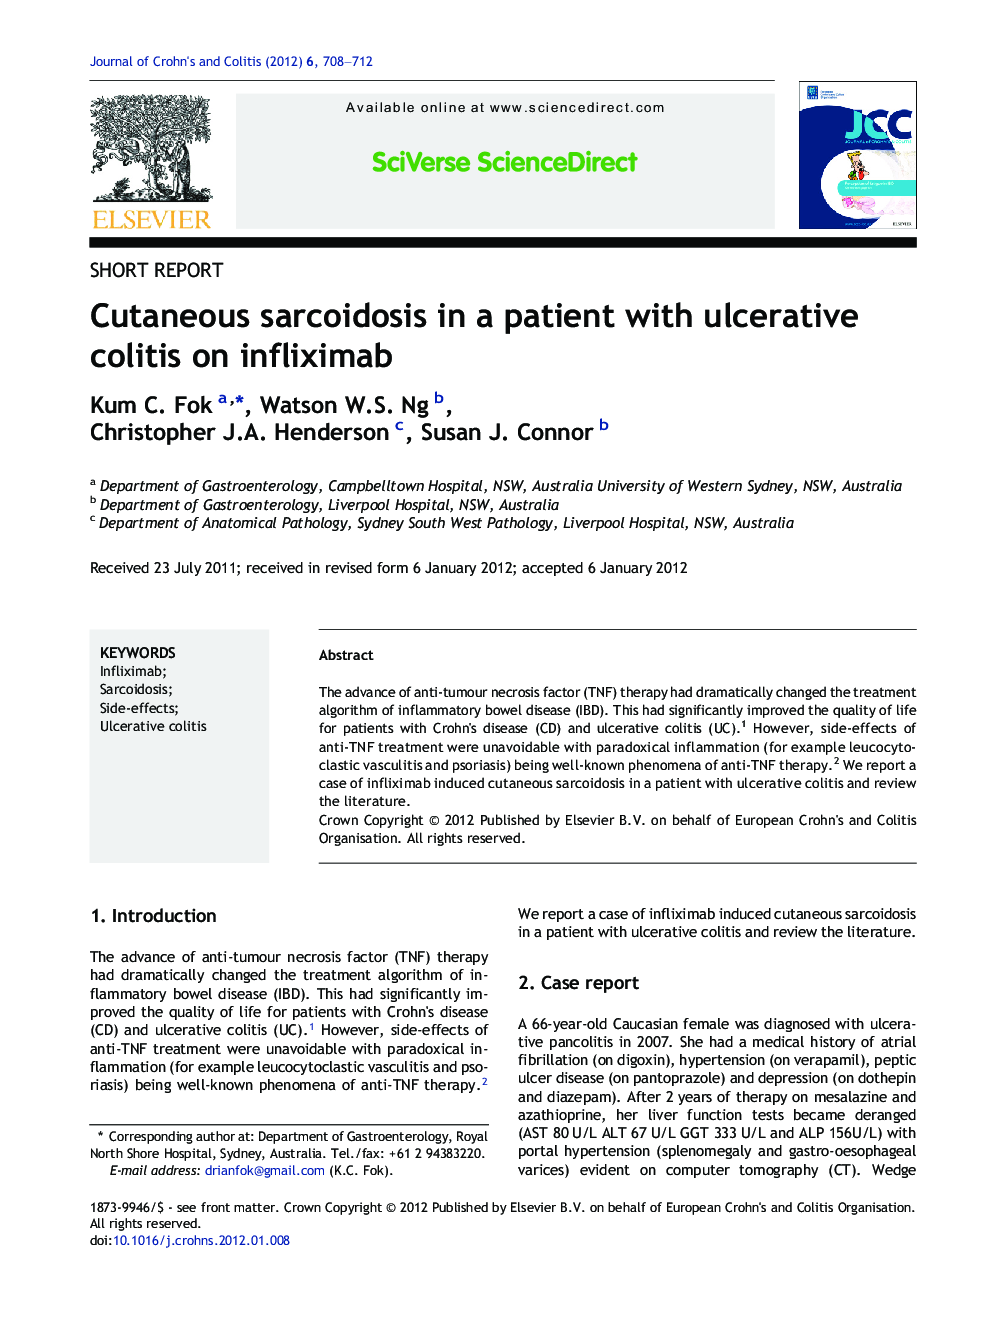 Cutaneous sarcoidosis in a patient with ulcerative colitis on infliximab